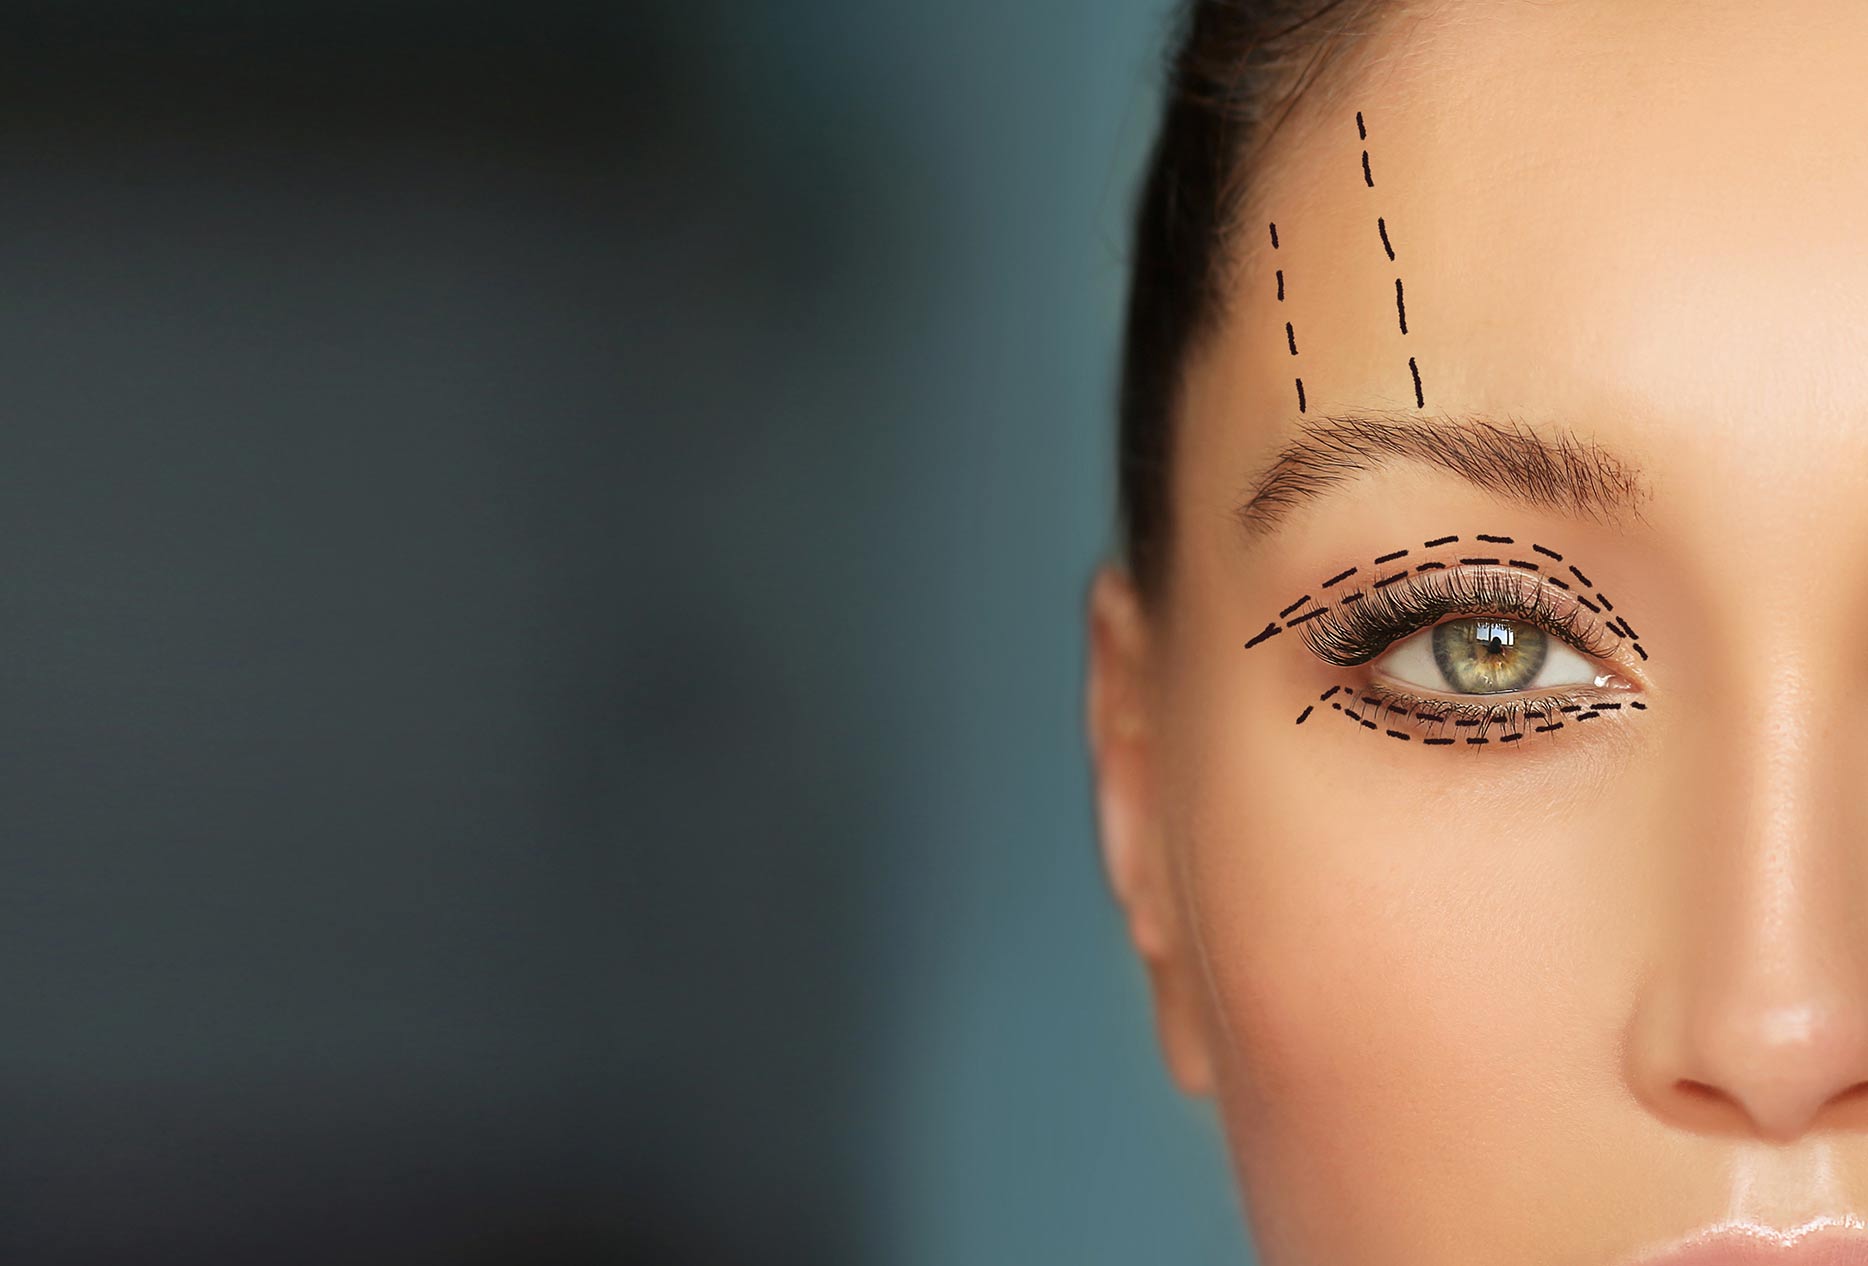 Lower and upper Blepharoplasty marking the face.